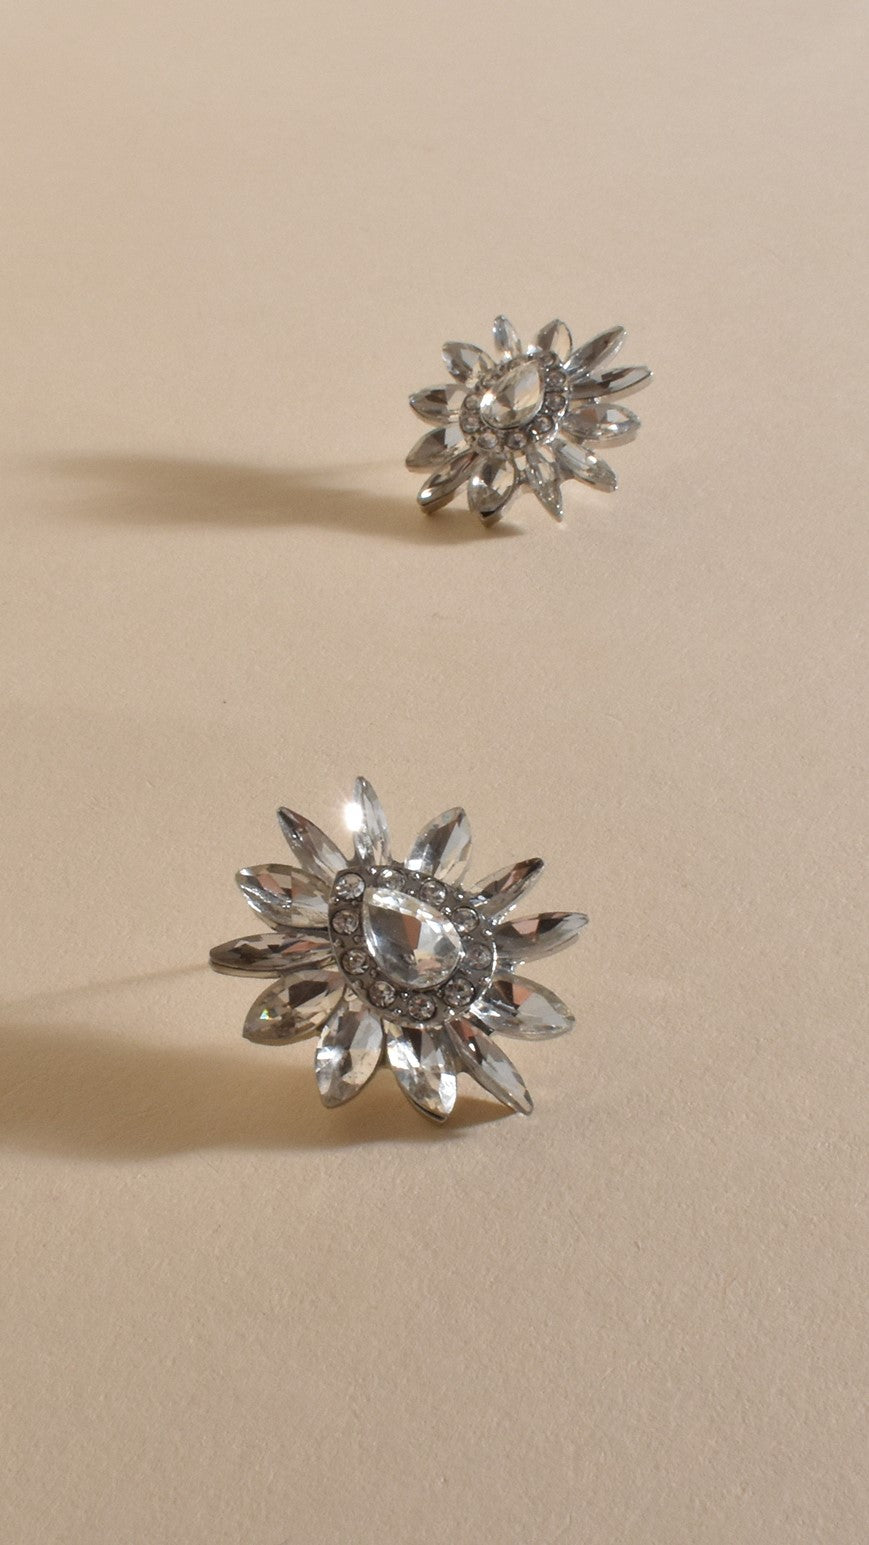 Spiked Floral Jewel Earrings - Crystal/Silver